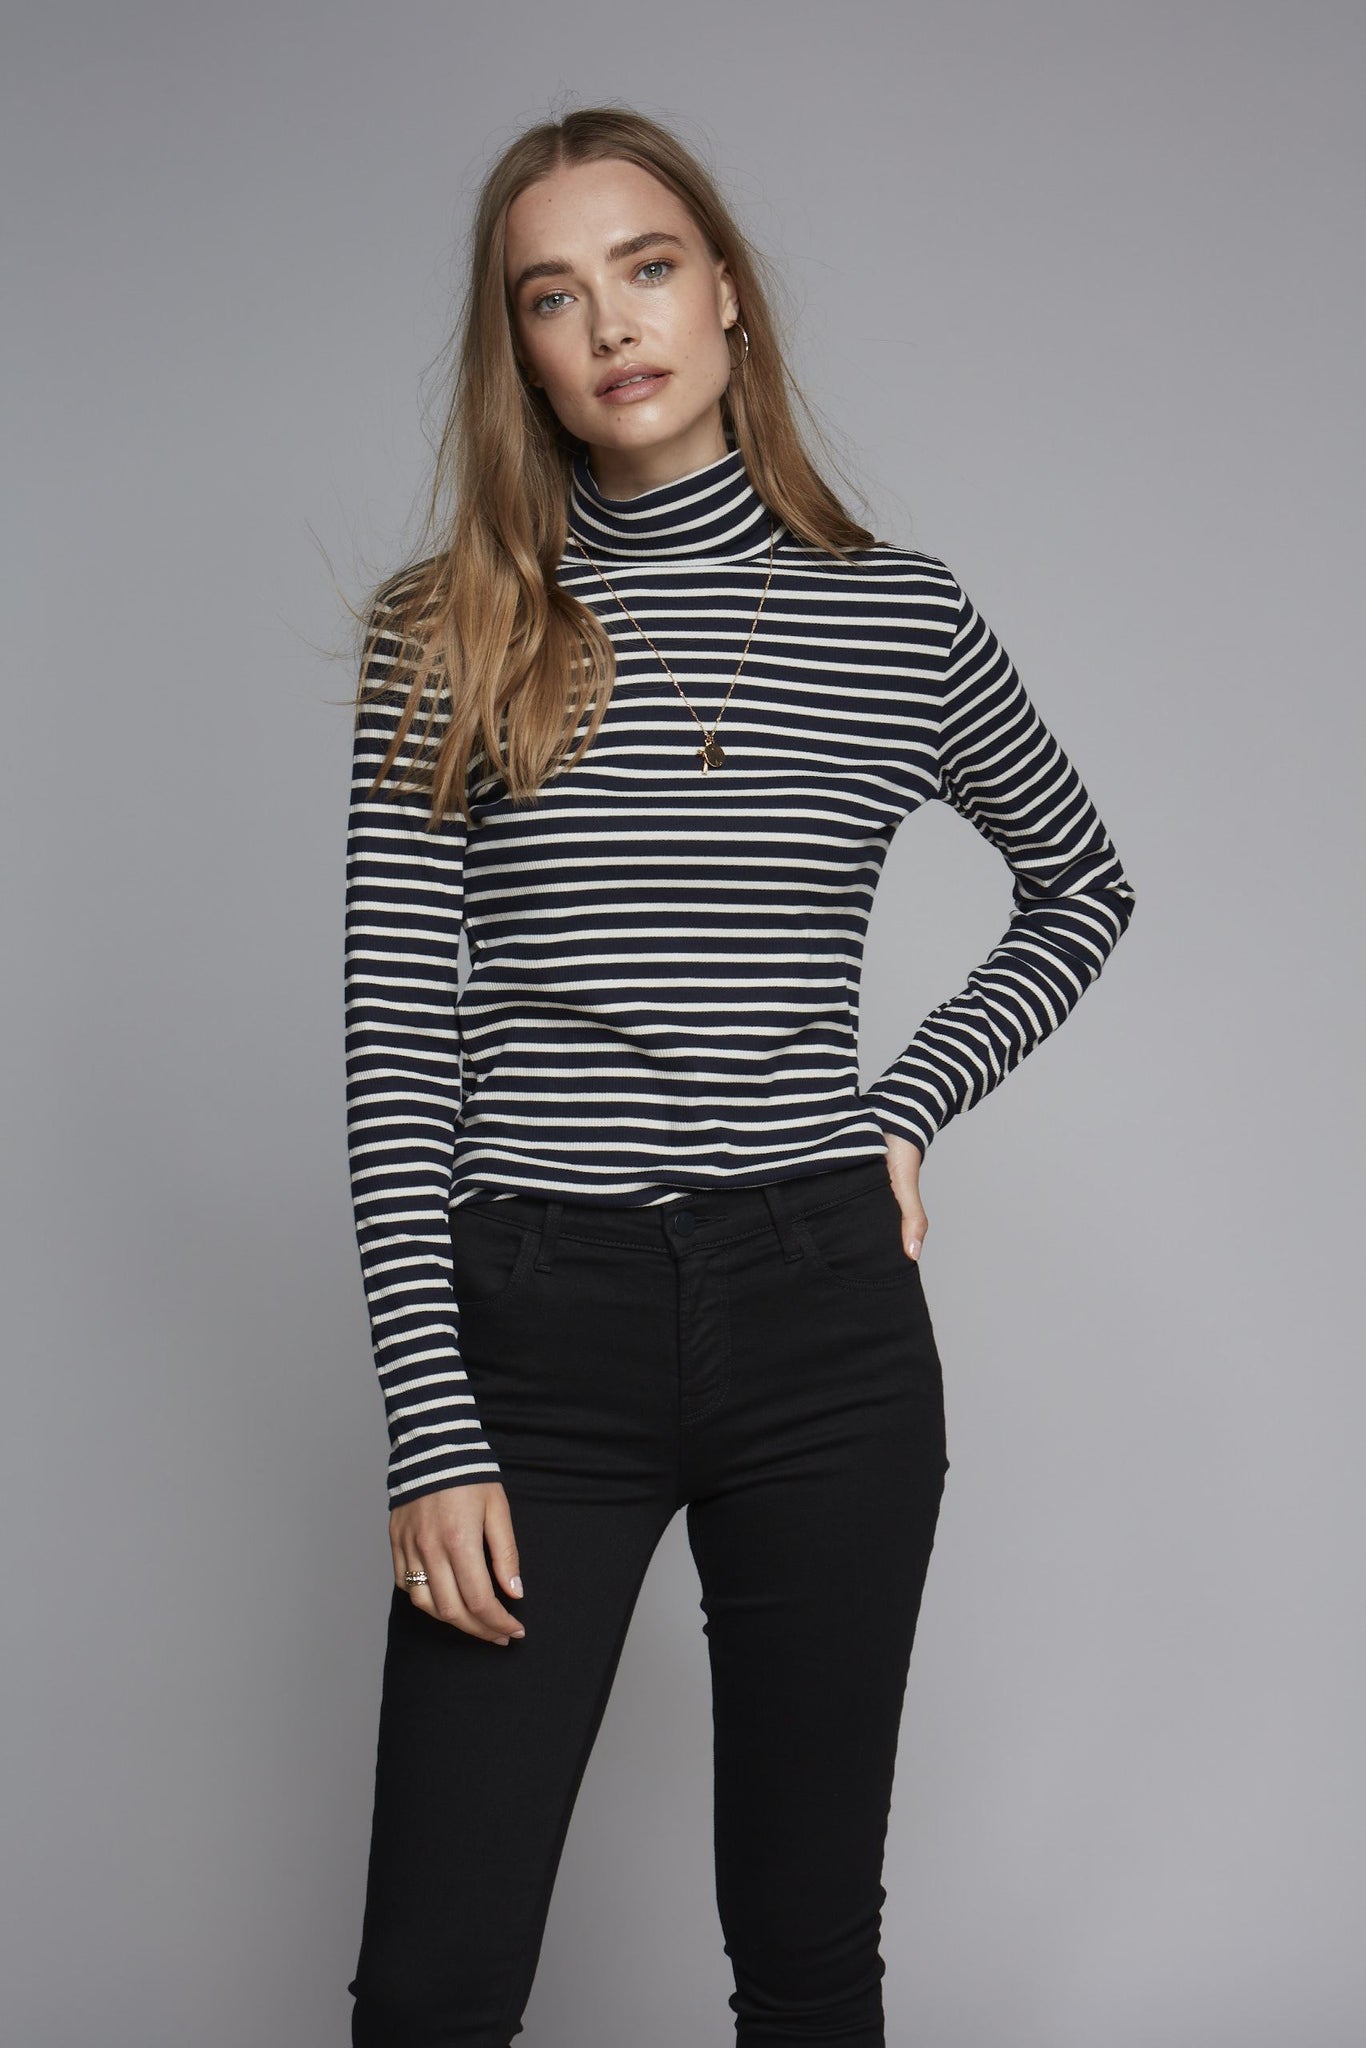 Women's Striped Cotton Roll Neck Top - Navy Ecru Long Sleeve Stripe Roll Neck Top - Flattering Roll Neck Top by Lavender Hill Clothing